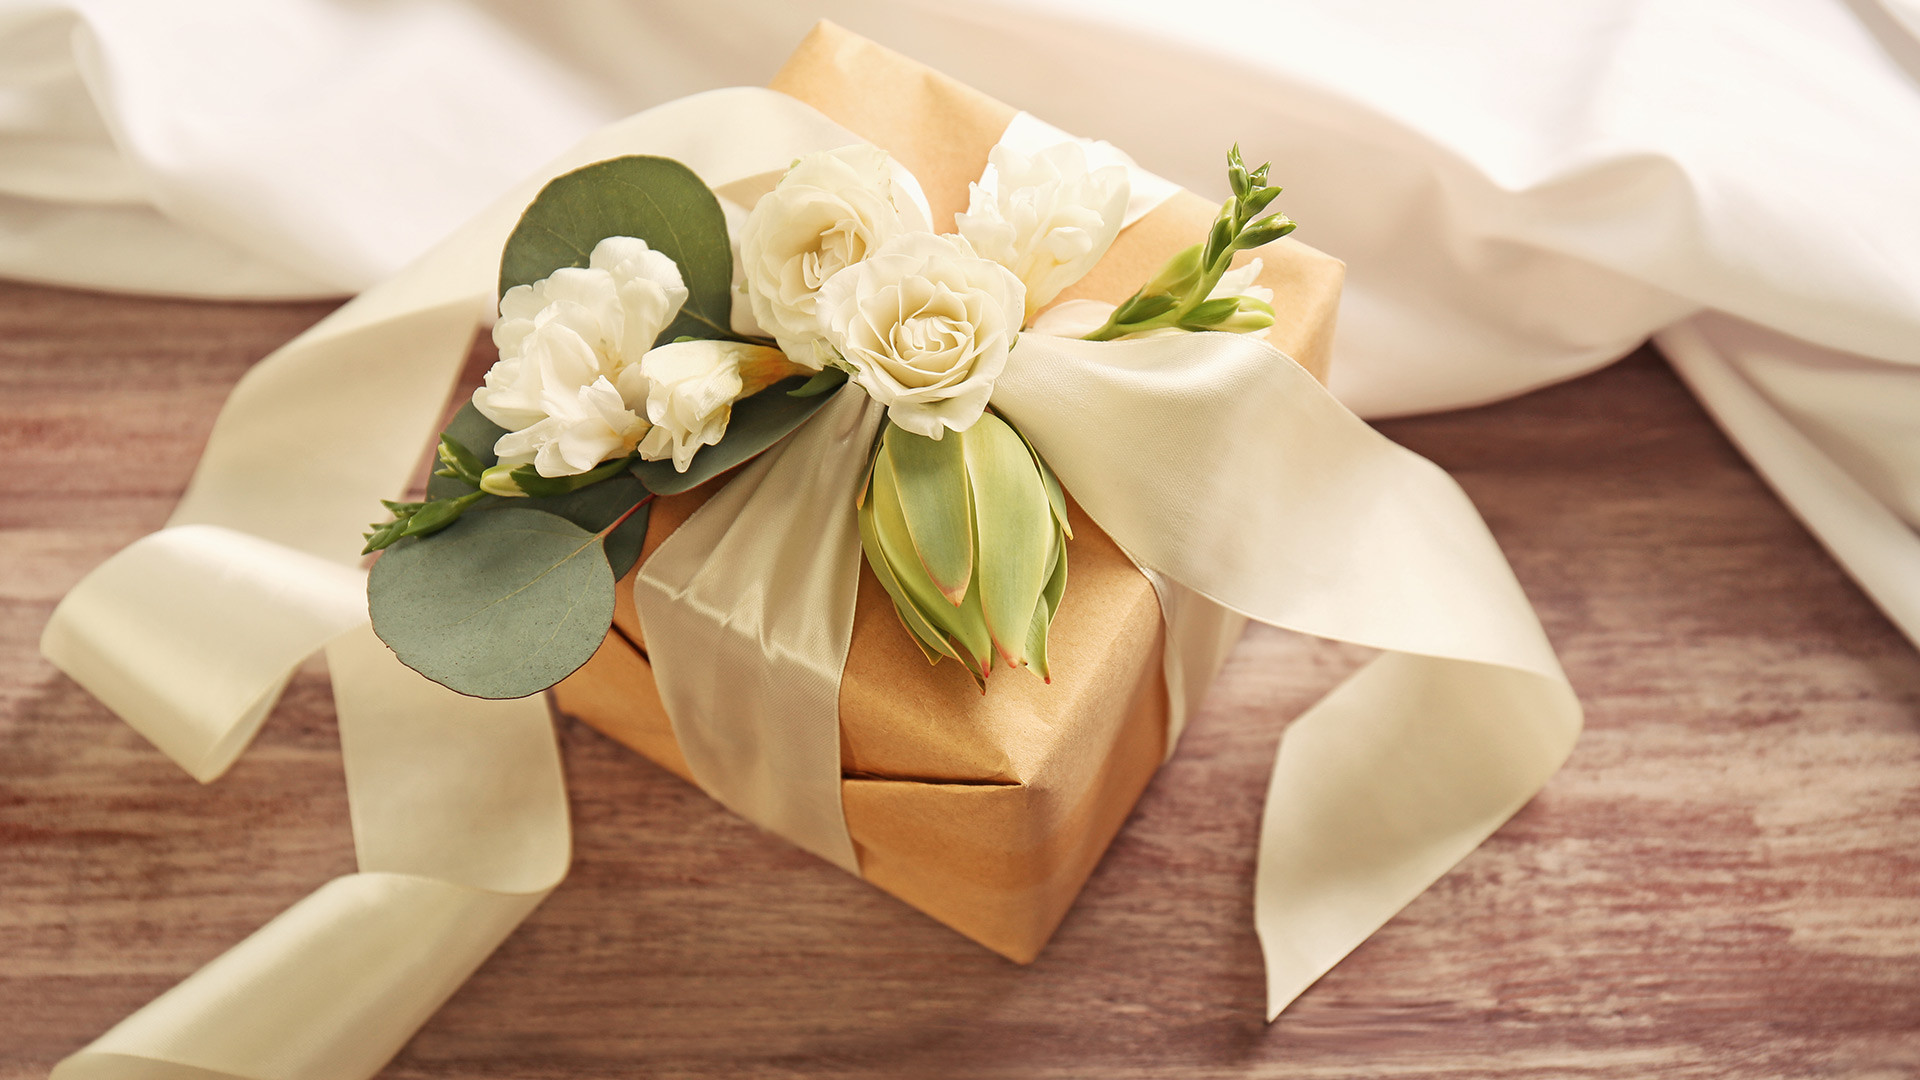 Gifts For Wedding
 How to Choose the Perfect Wedding Gift For a Couple